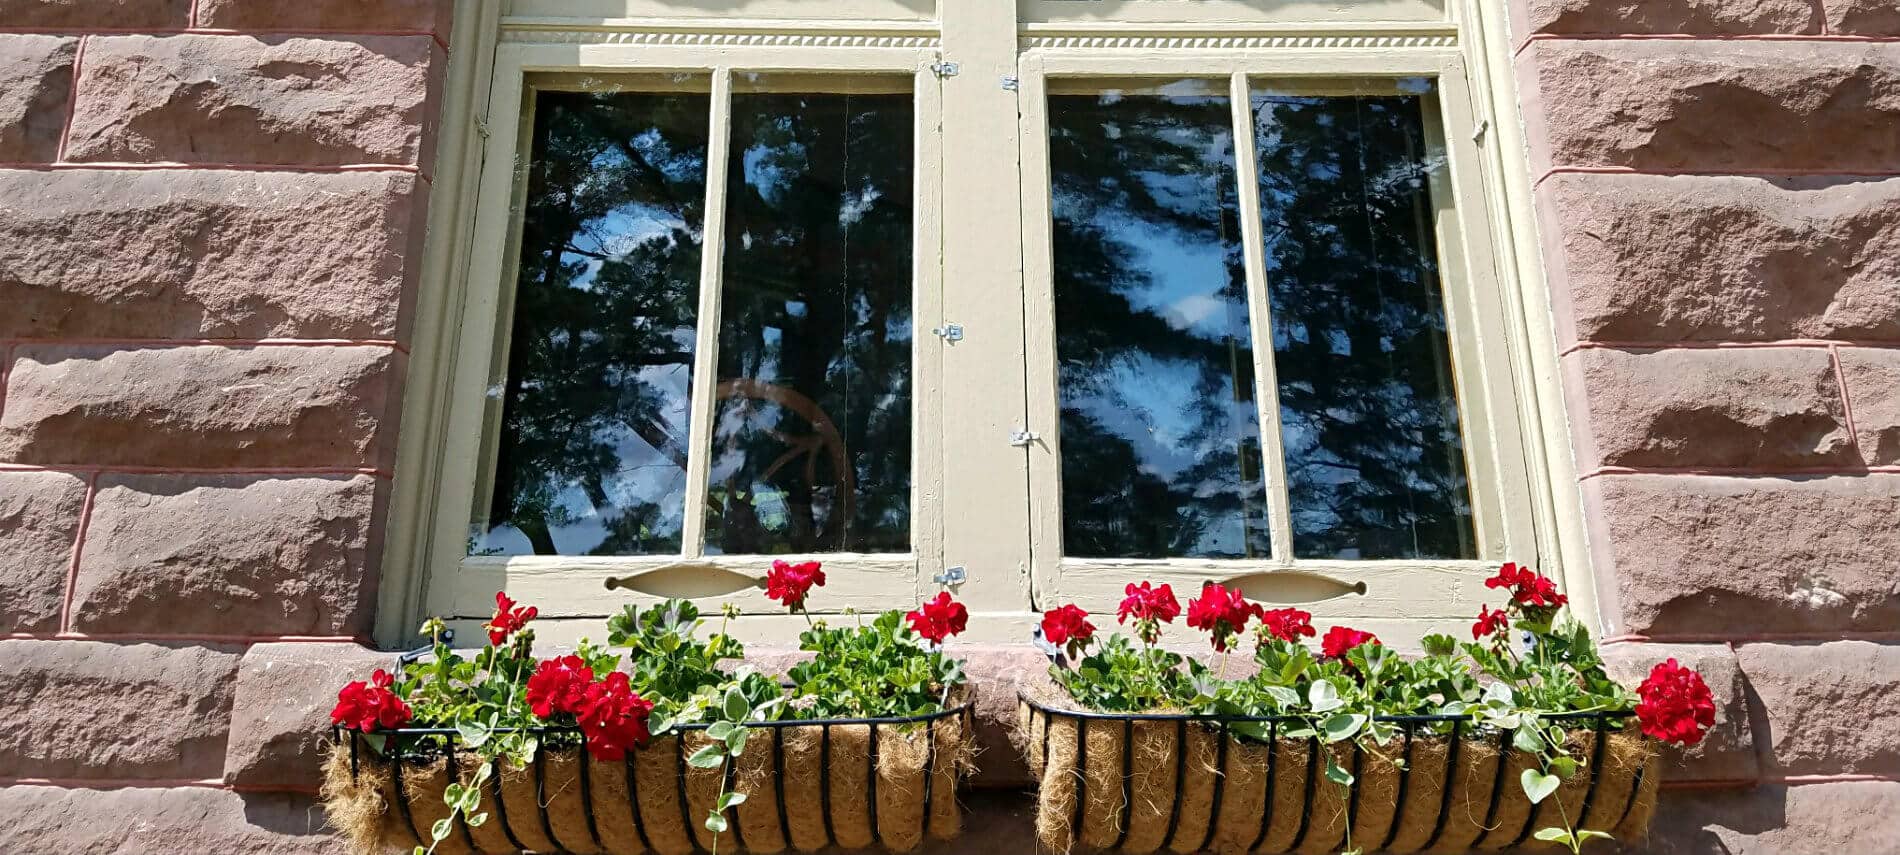 Close up view of exterior window surrounded by reddish stone and two window boxes with bright red flowers